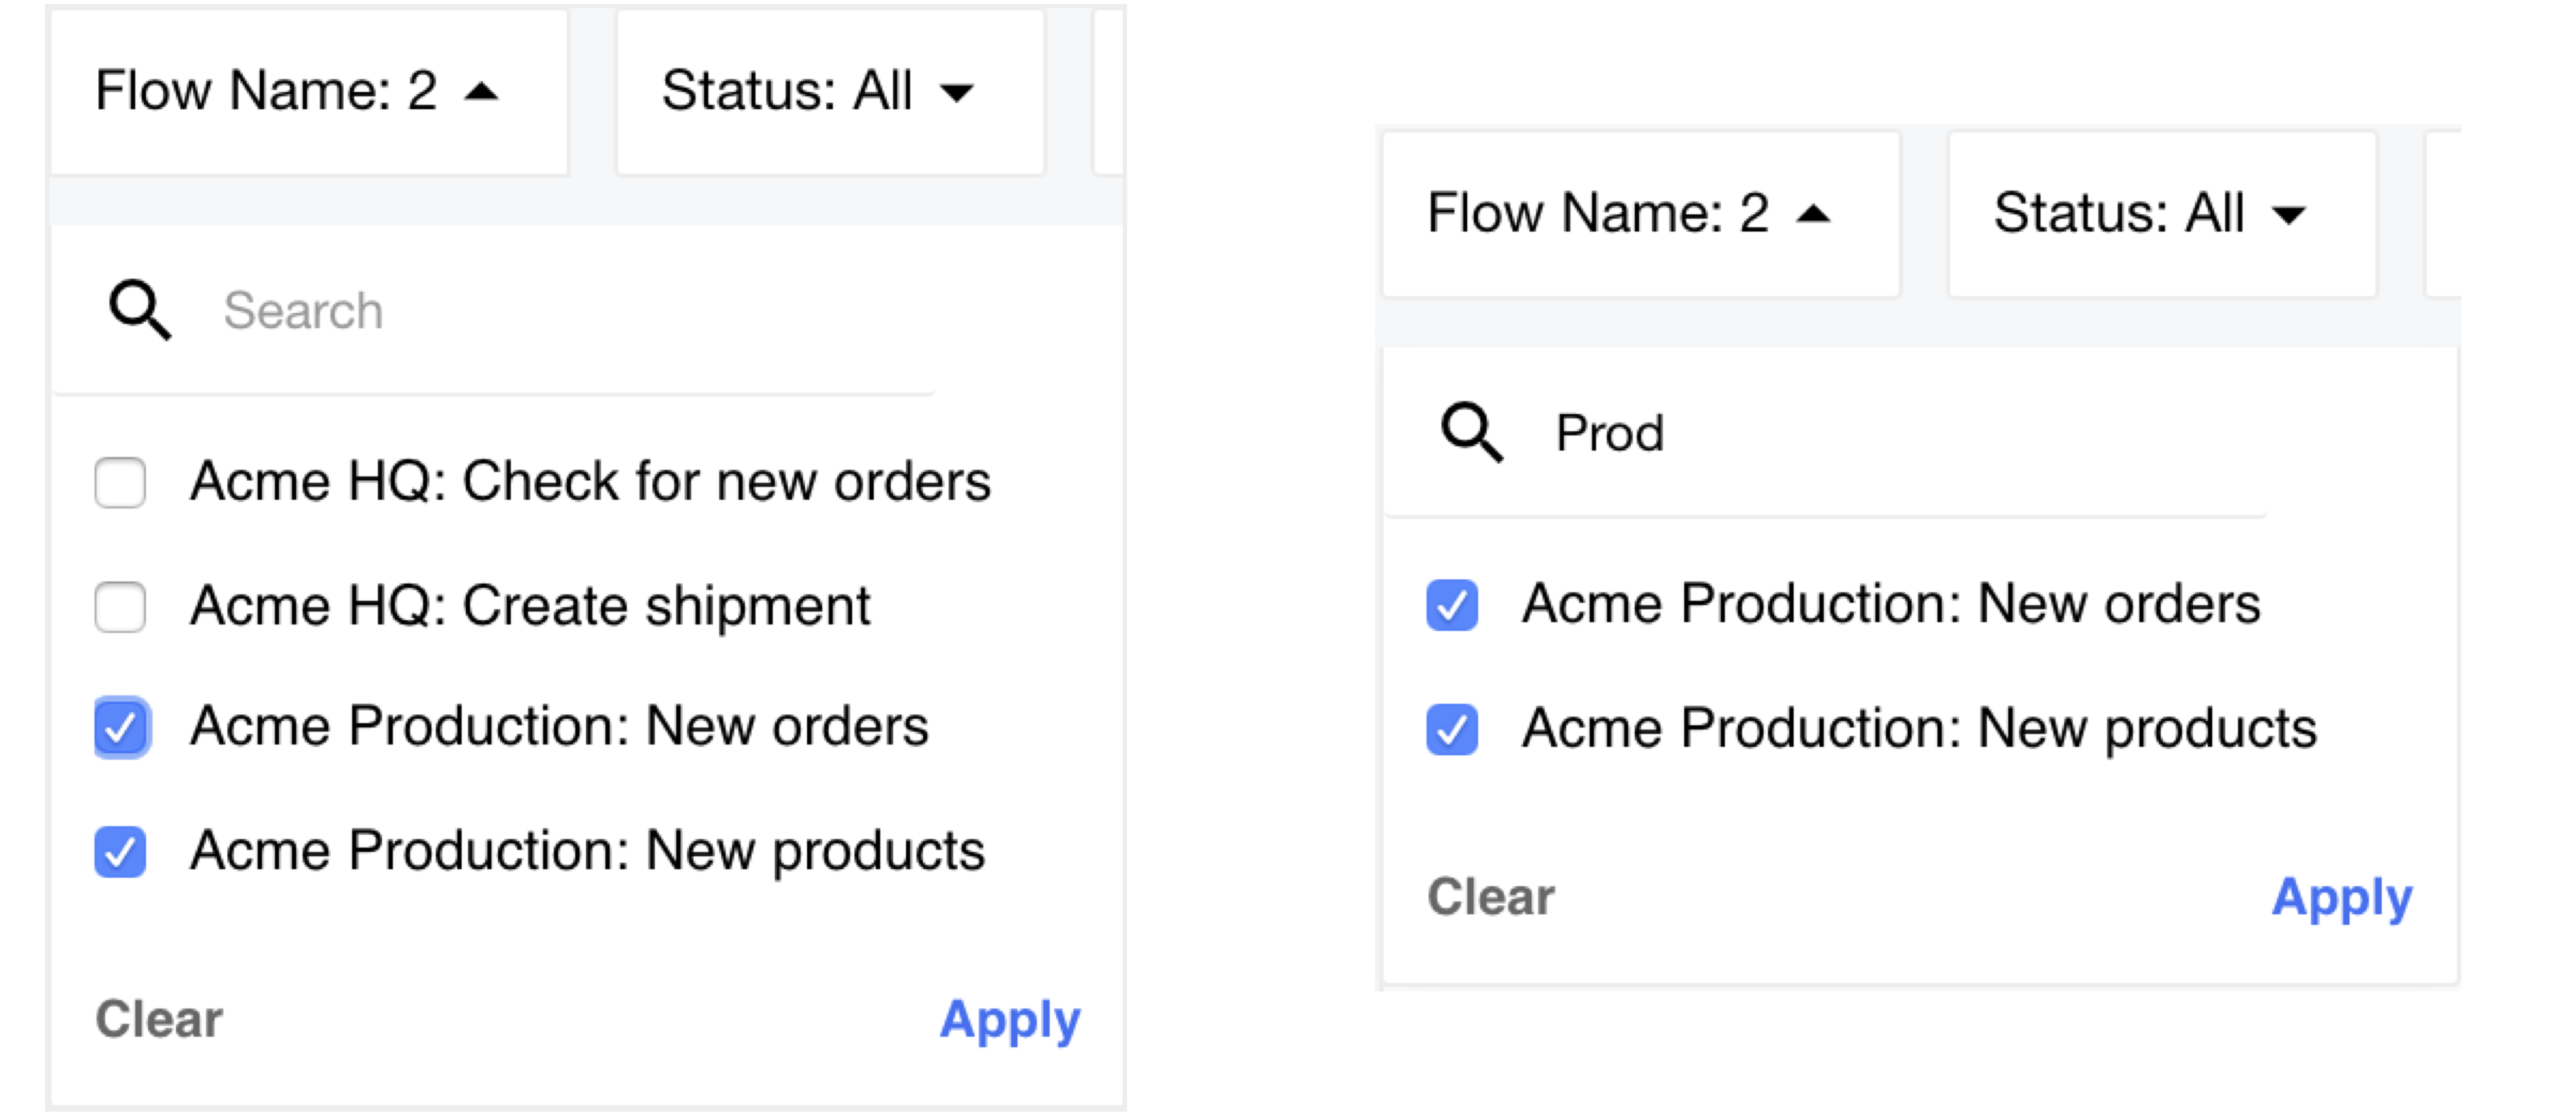 Flow Name filter with two selected flows